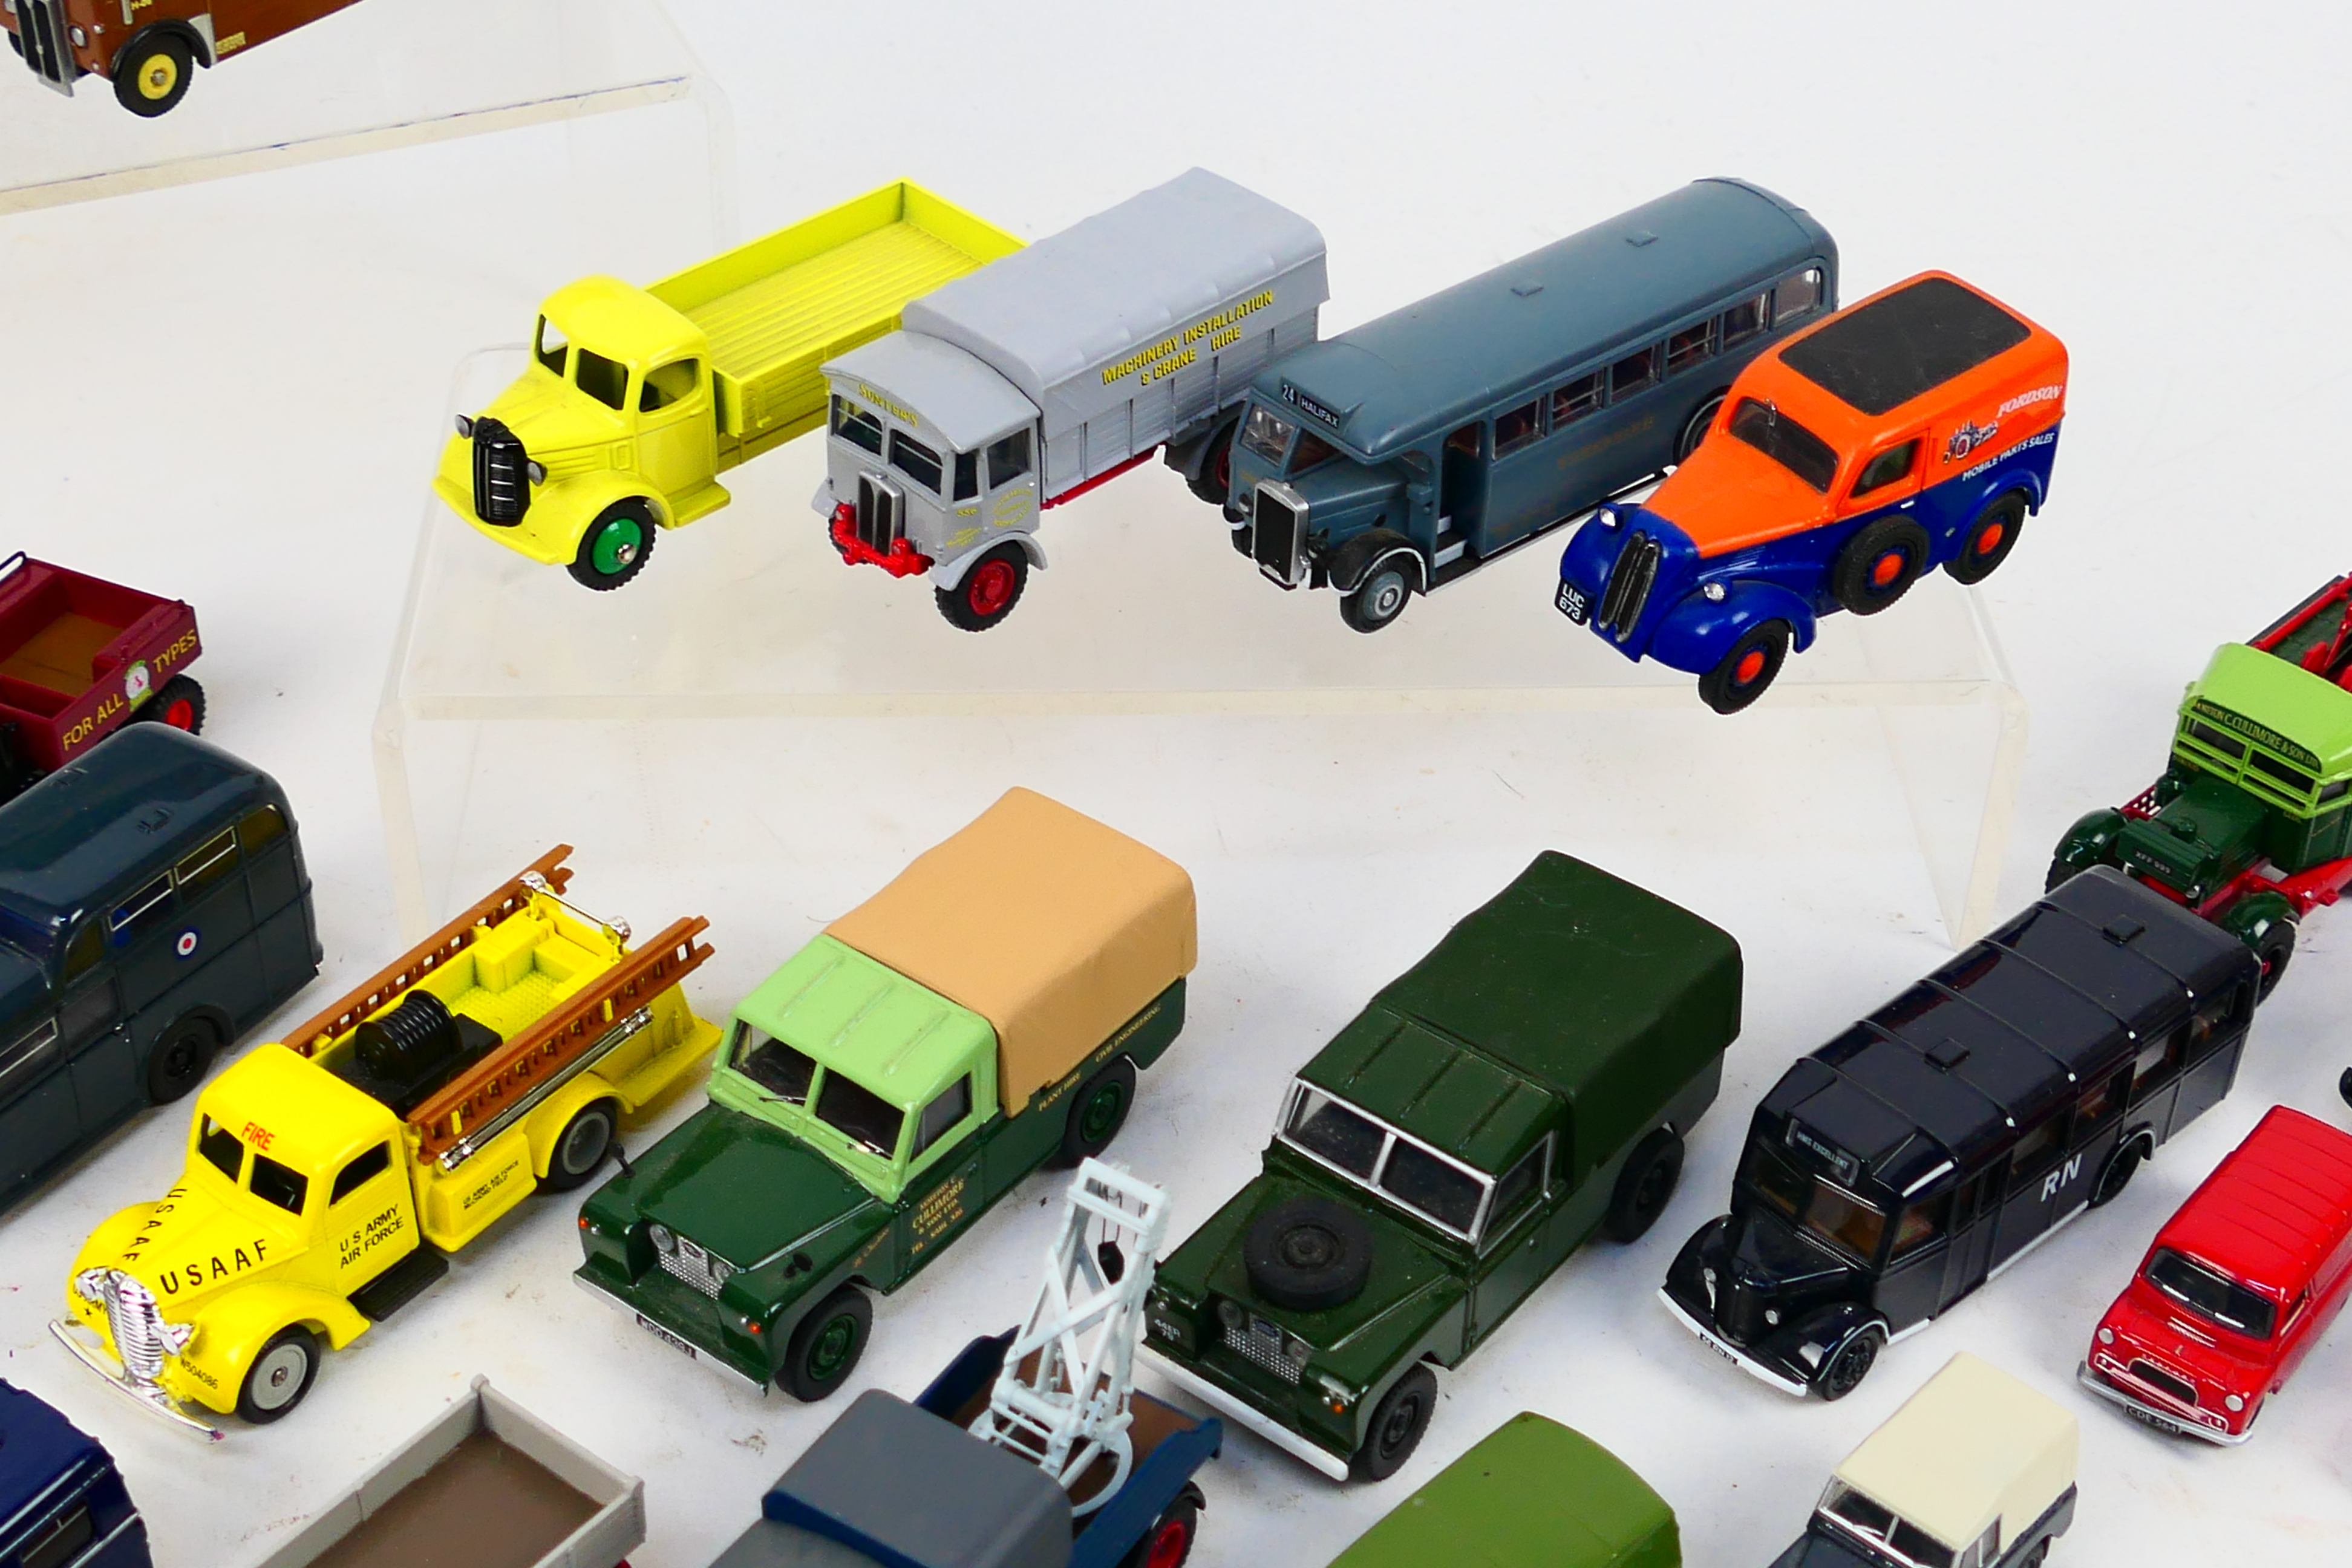 Oxford Diecast - Classix - Corgi - Lledo - Approximately 30 diecast model vehicles in various - Image 4 of 6